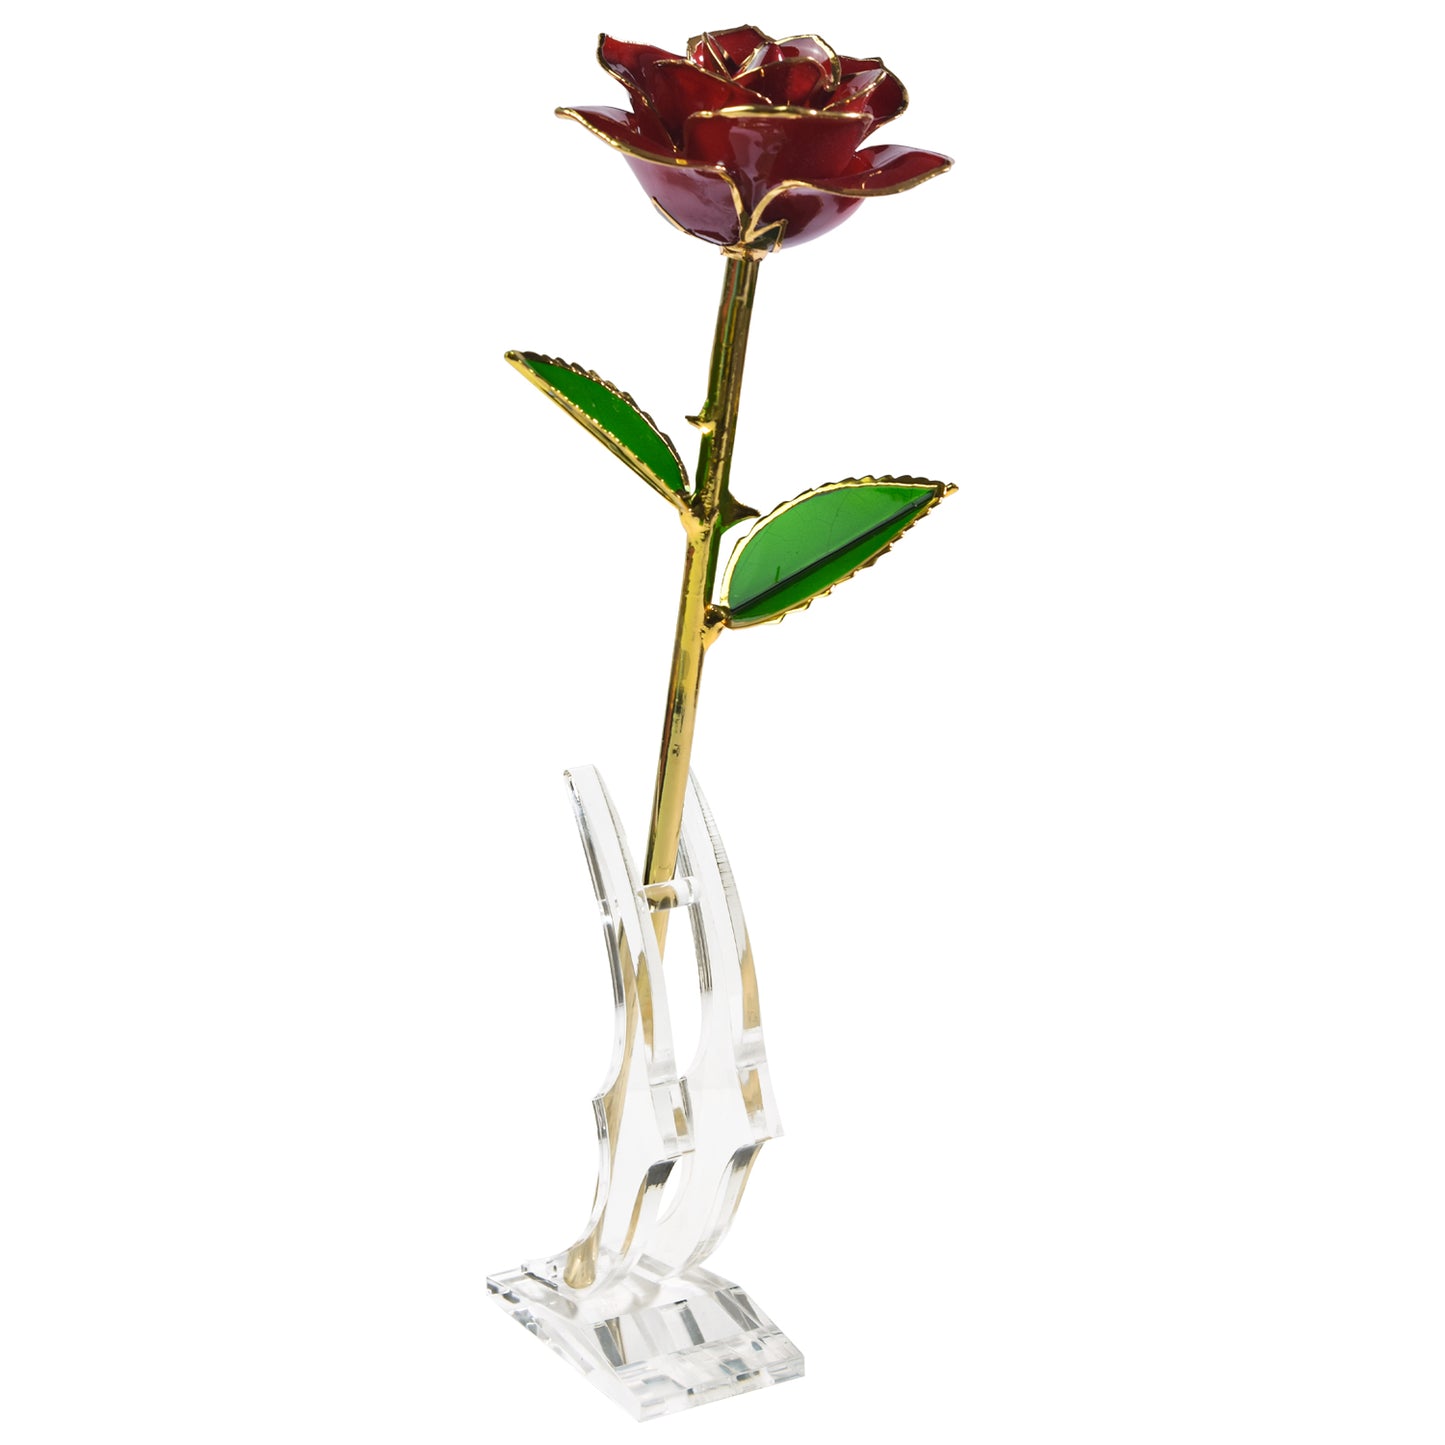 Ainyrose 24k Gold Forever Rose With Base-3 Colors